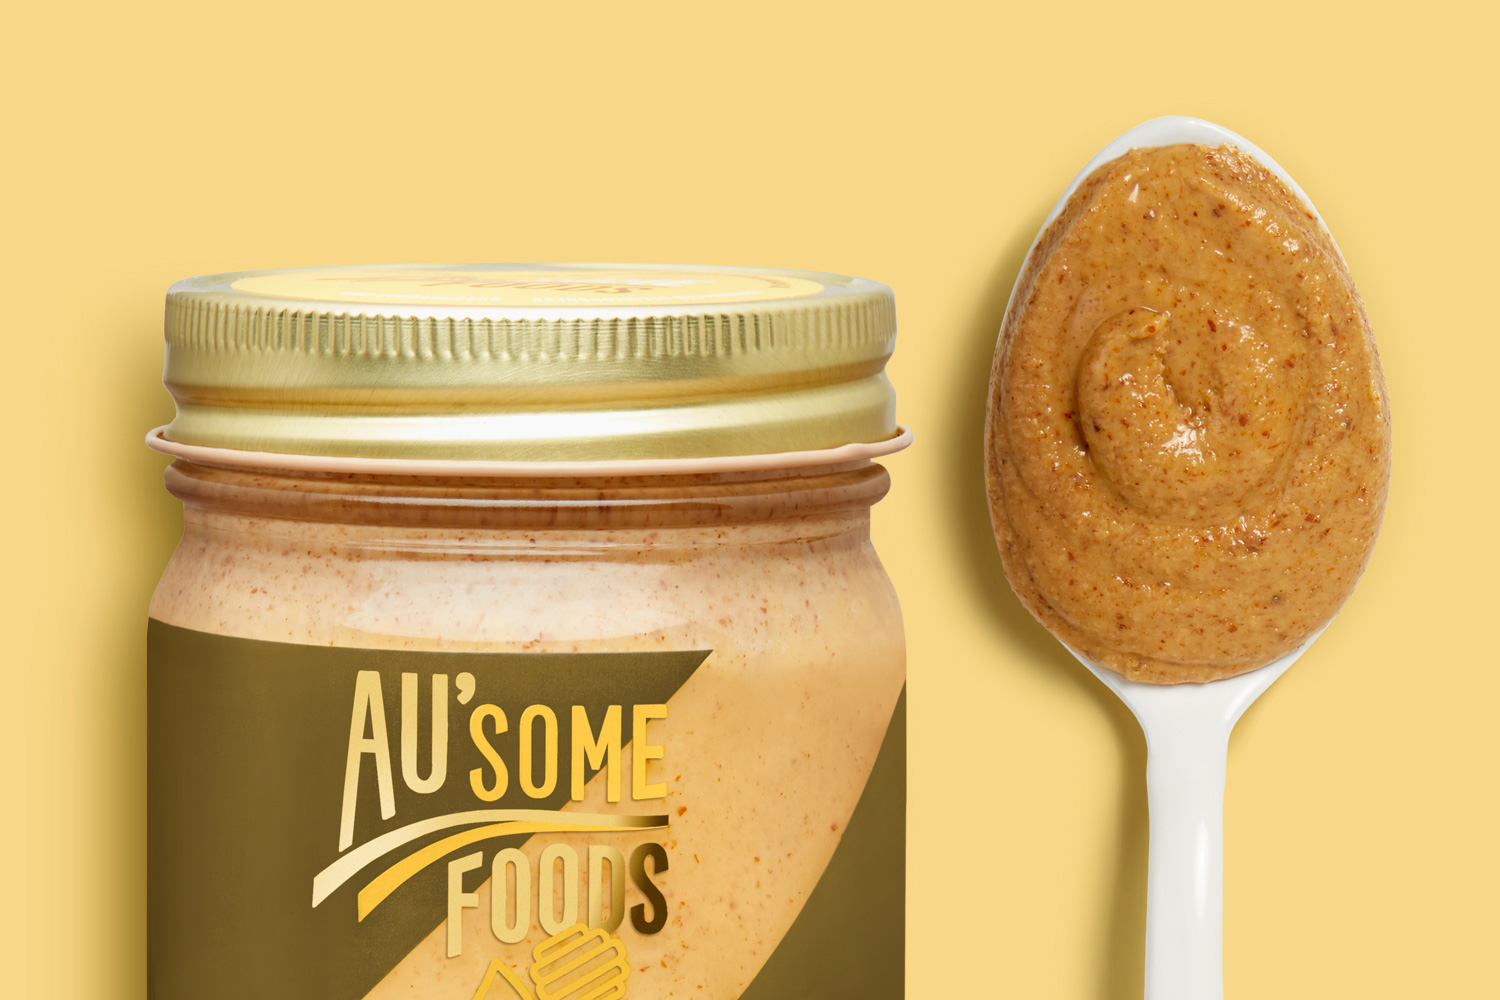 Au'some Foods Almond Butter